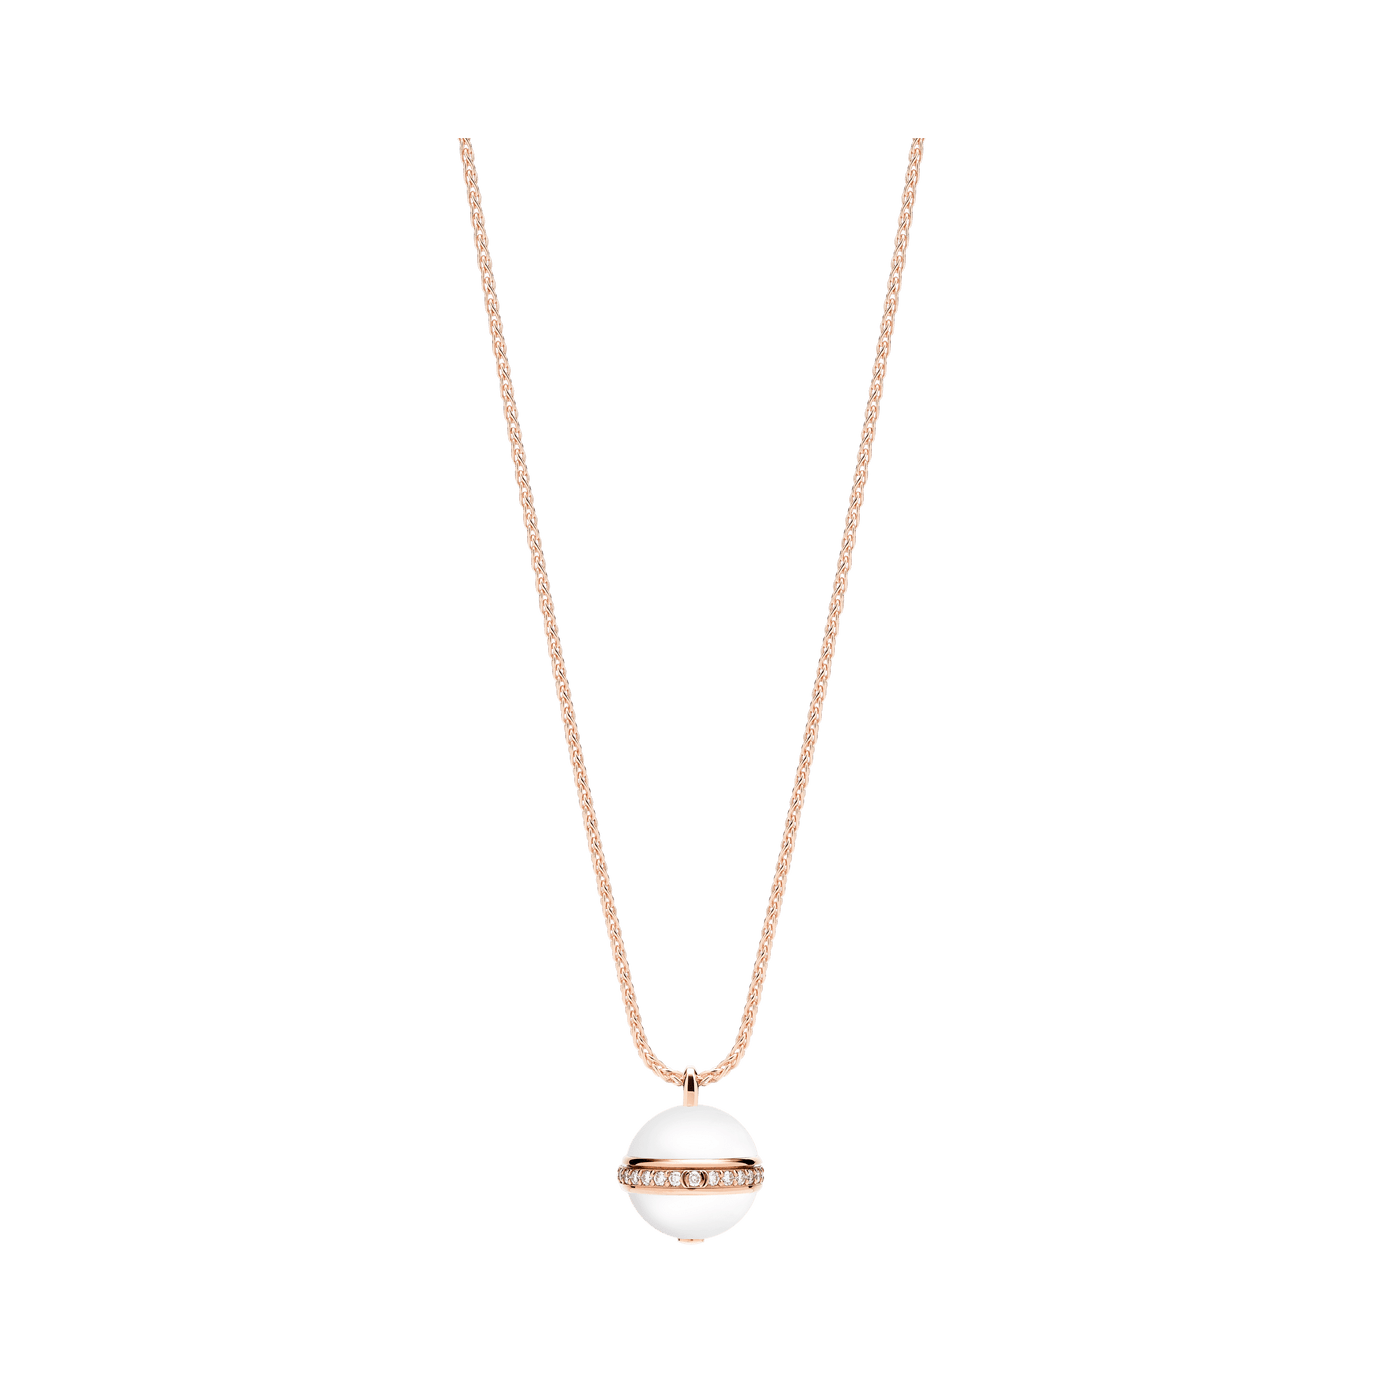 Piaget Jewelry For Sale – Opulent Jewelers